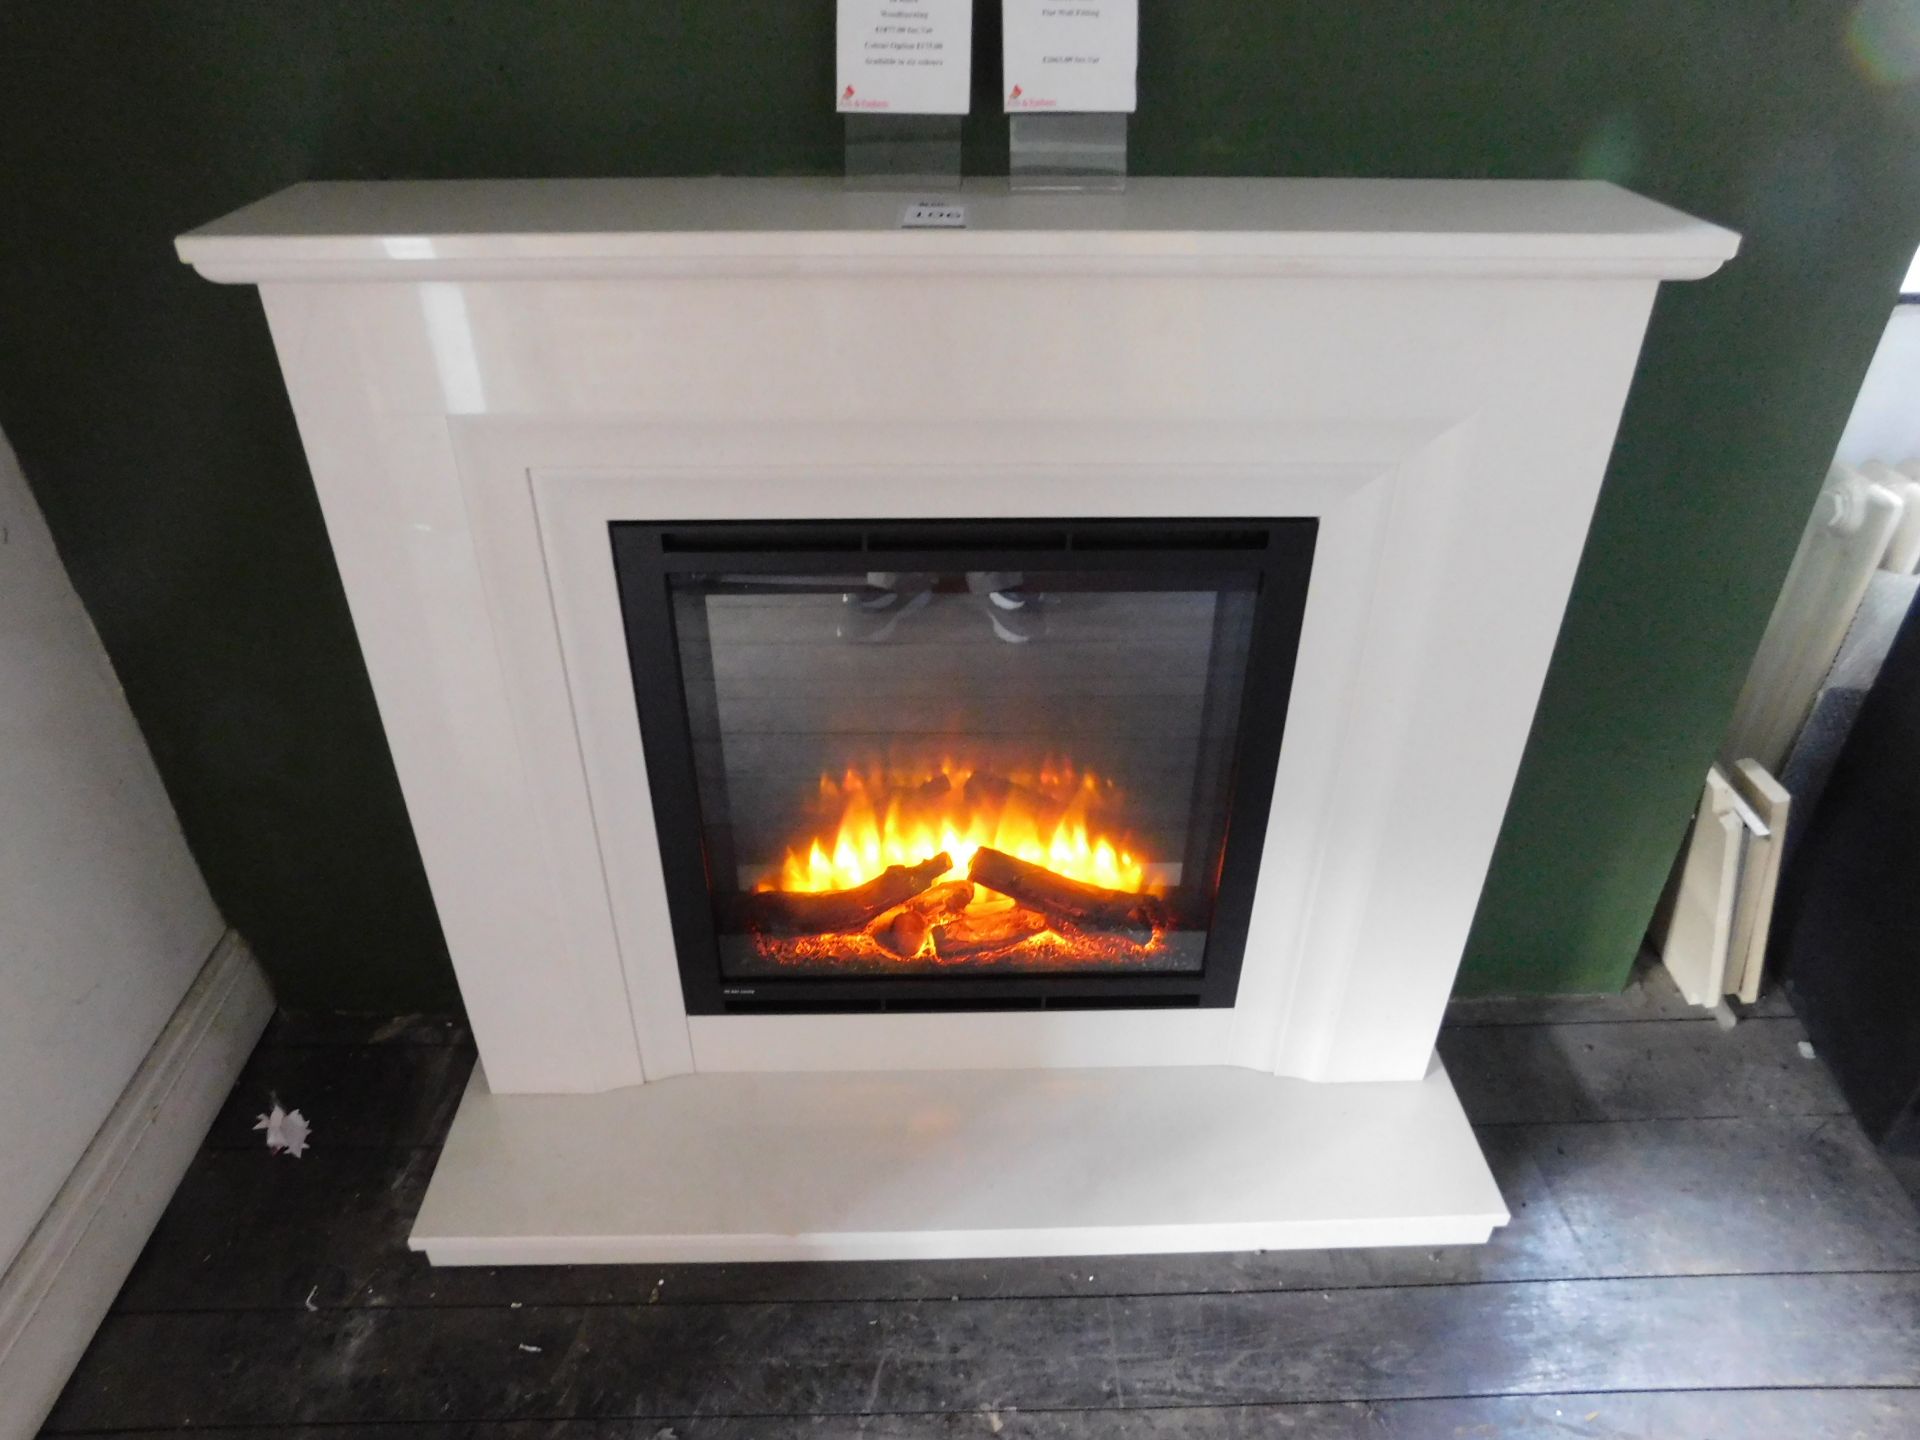 Ex-Display Elgin & Hall “Vitalia” Fireplace Surround & Hearth with Chesney “Shoreditch” 4.9kw